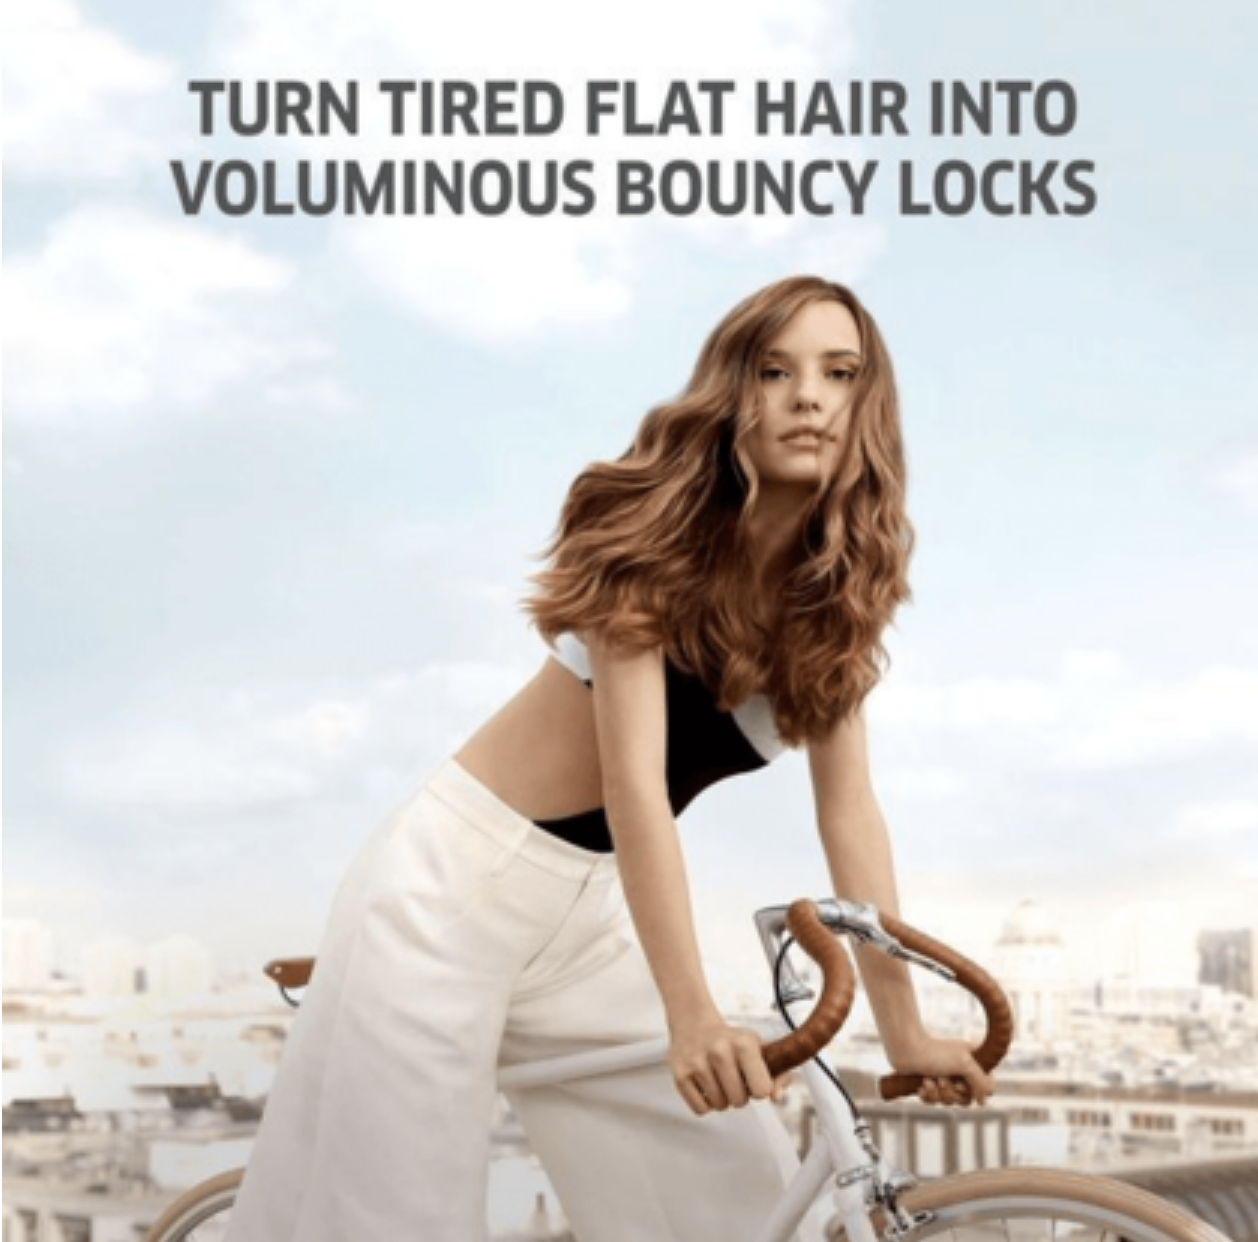 Model with bouncy hair after using Wella Invigo Volume Booster